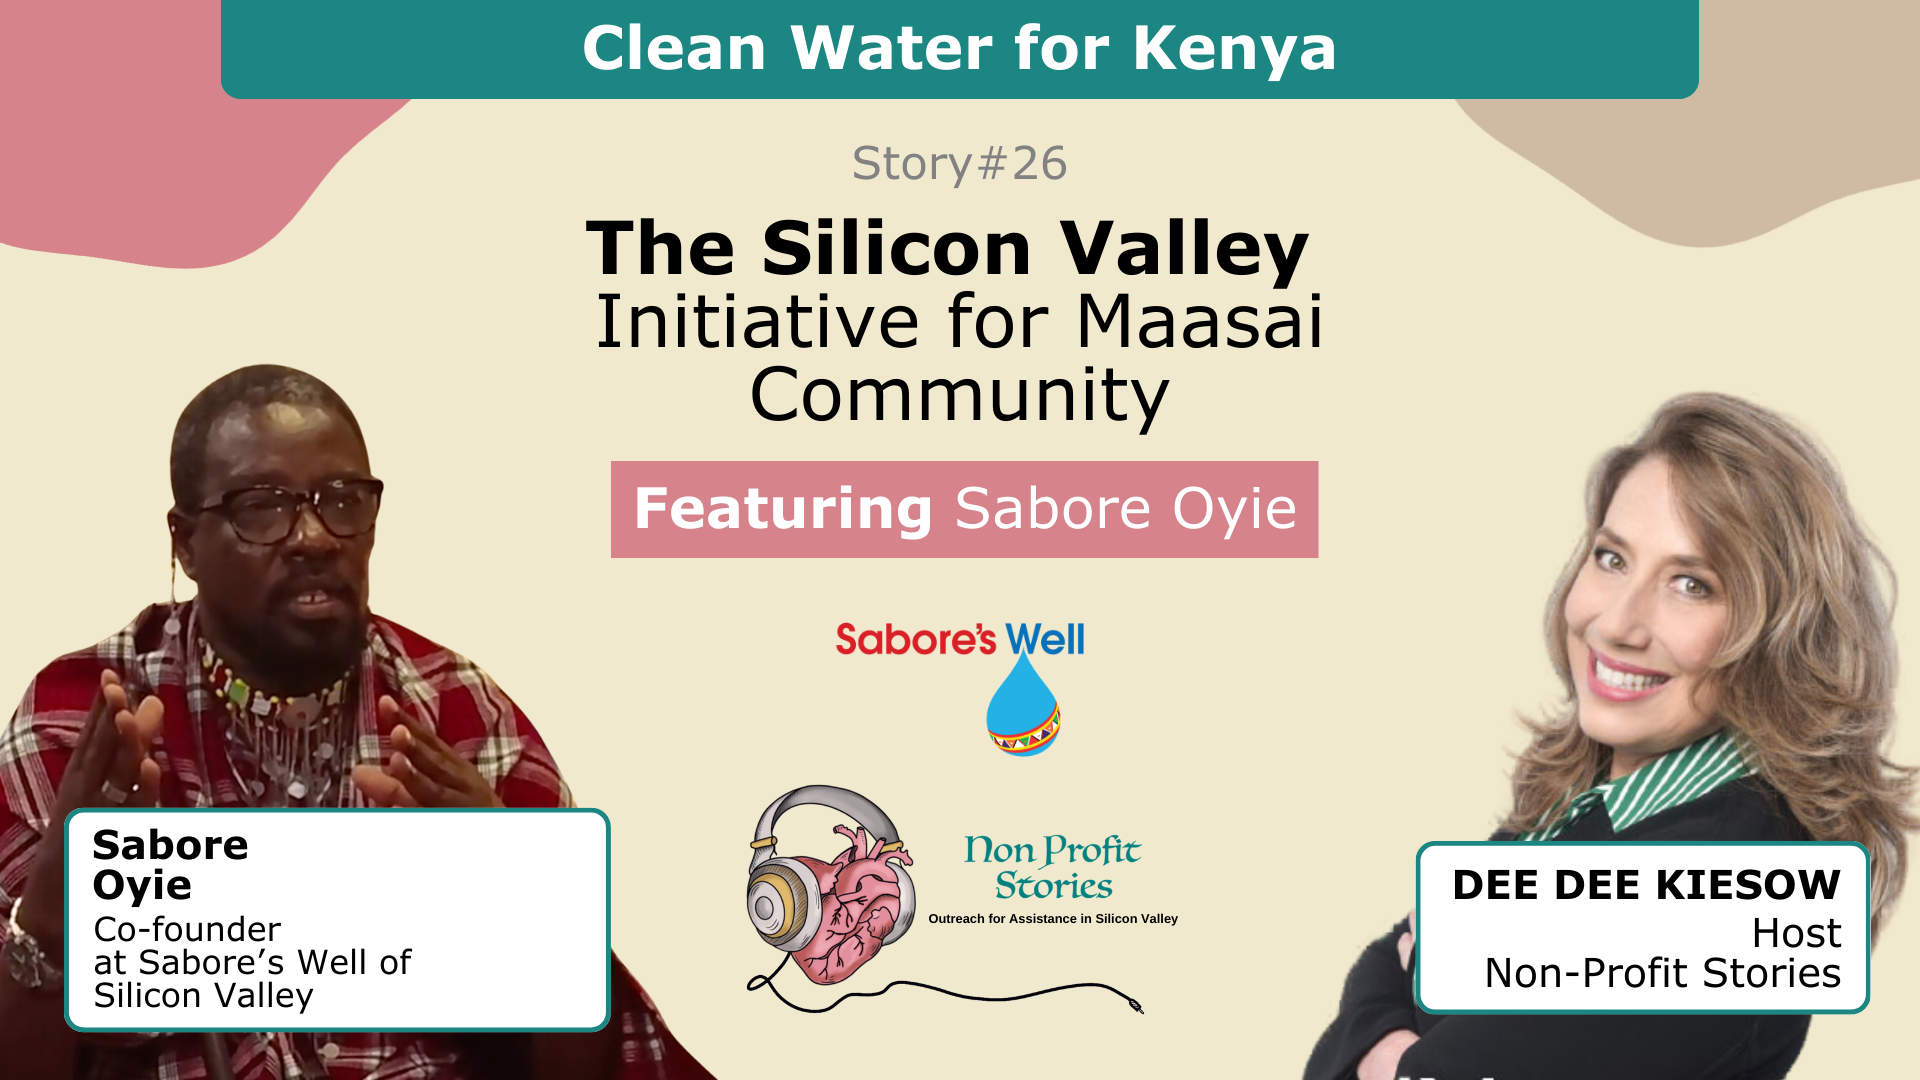 Clean Water: The Silicon Valley Initiative for Maasai Community